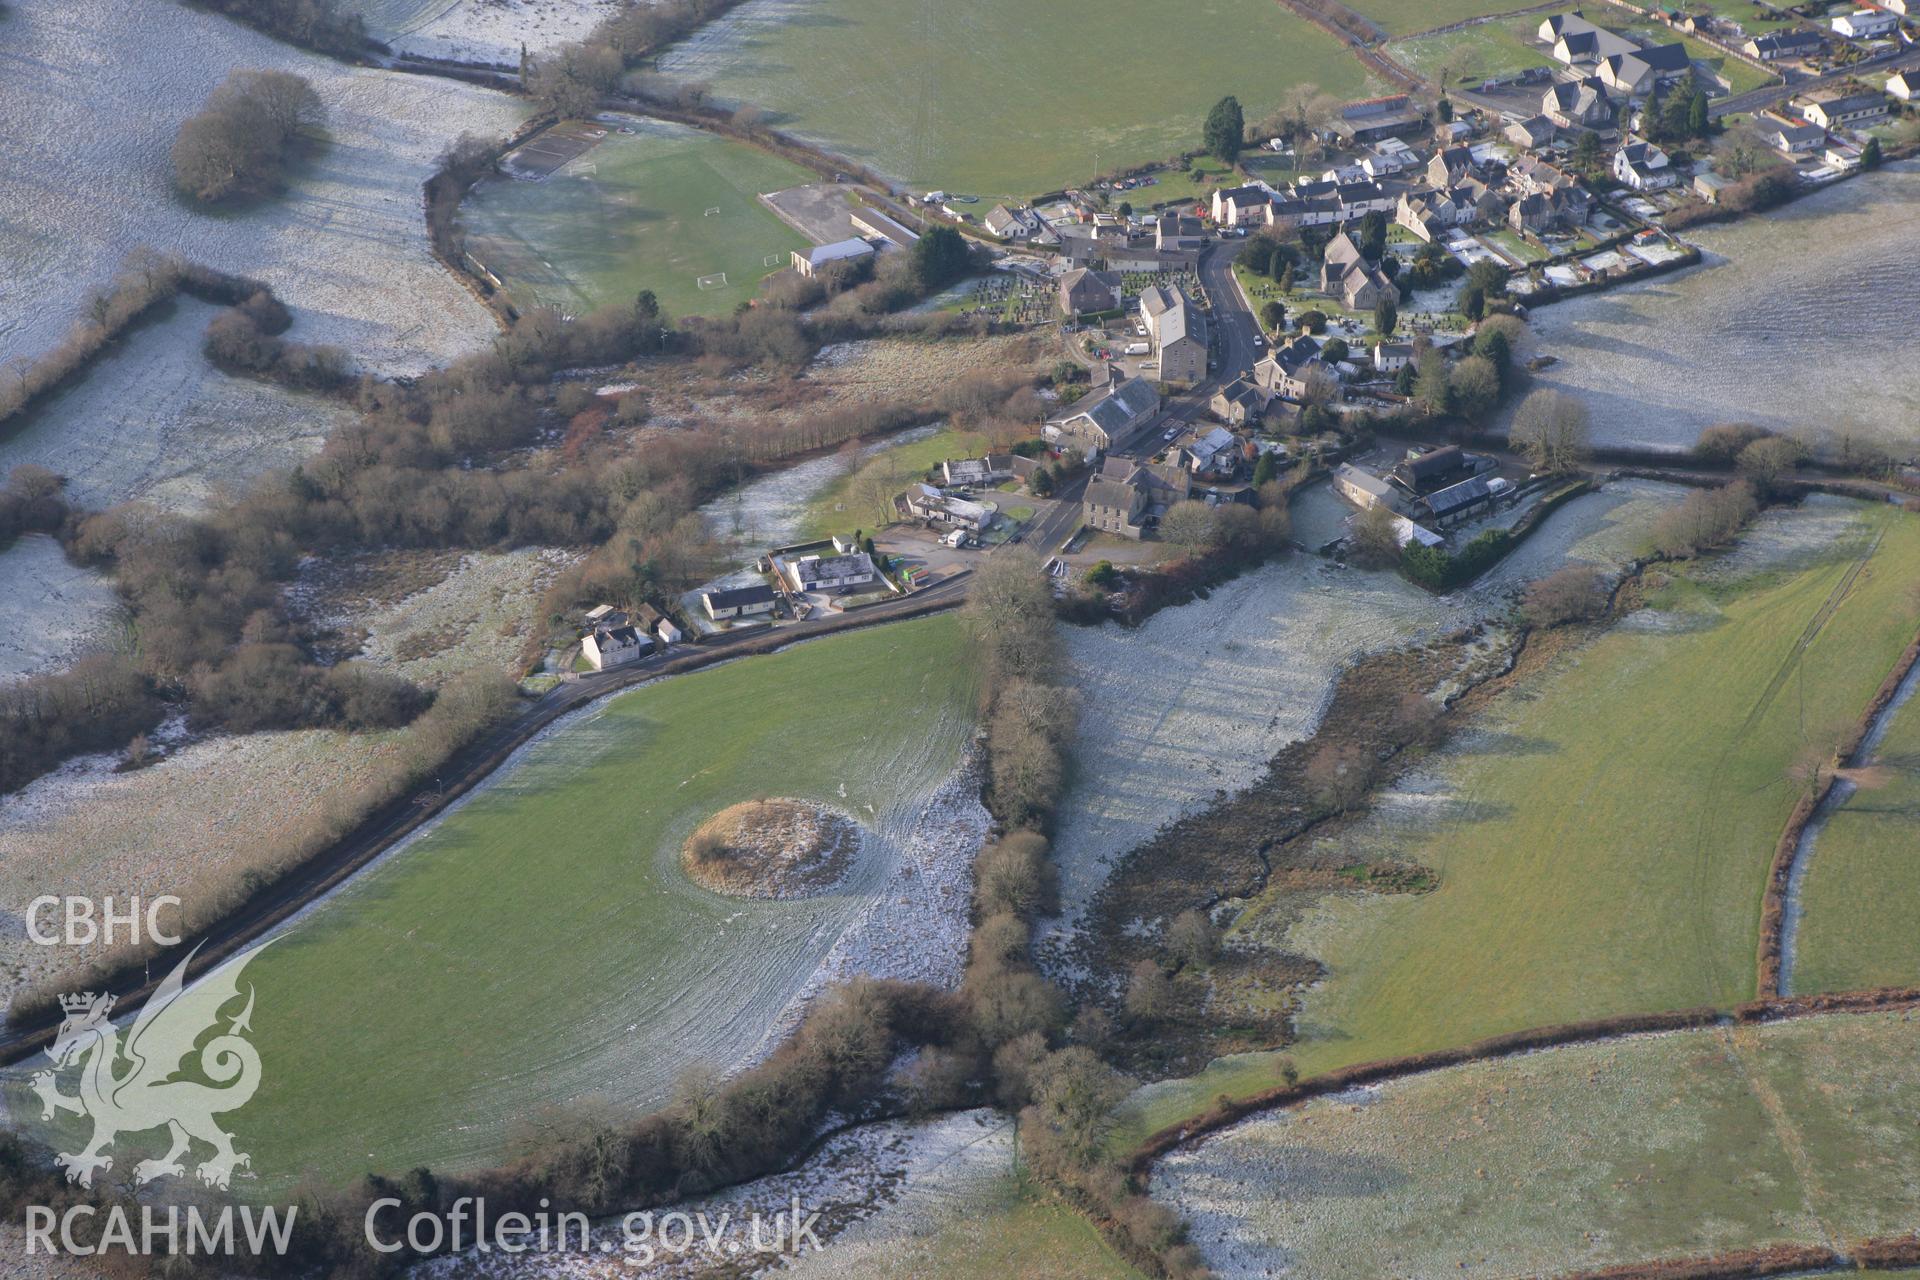 RCAHMW colour oblique photograph of Castell Mawr Llanboidy. Taken by Toby Driver on 02/12/2010.